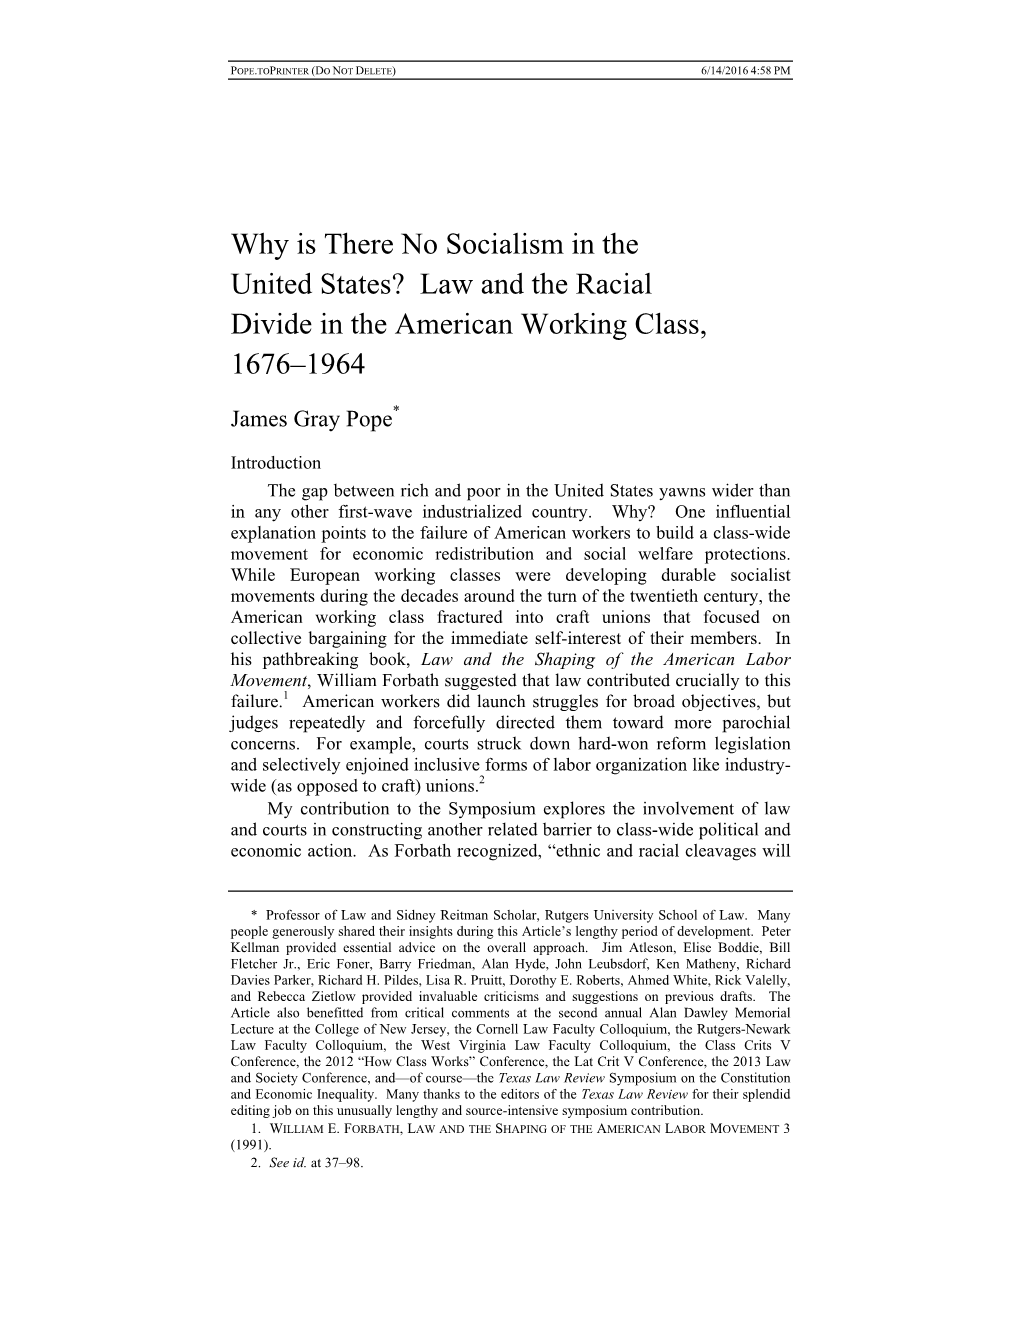 Law and the Racial Divide in the American Working Class, 1676–1964